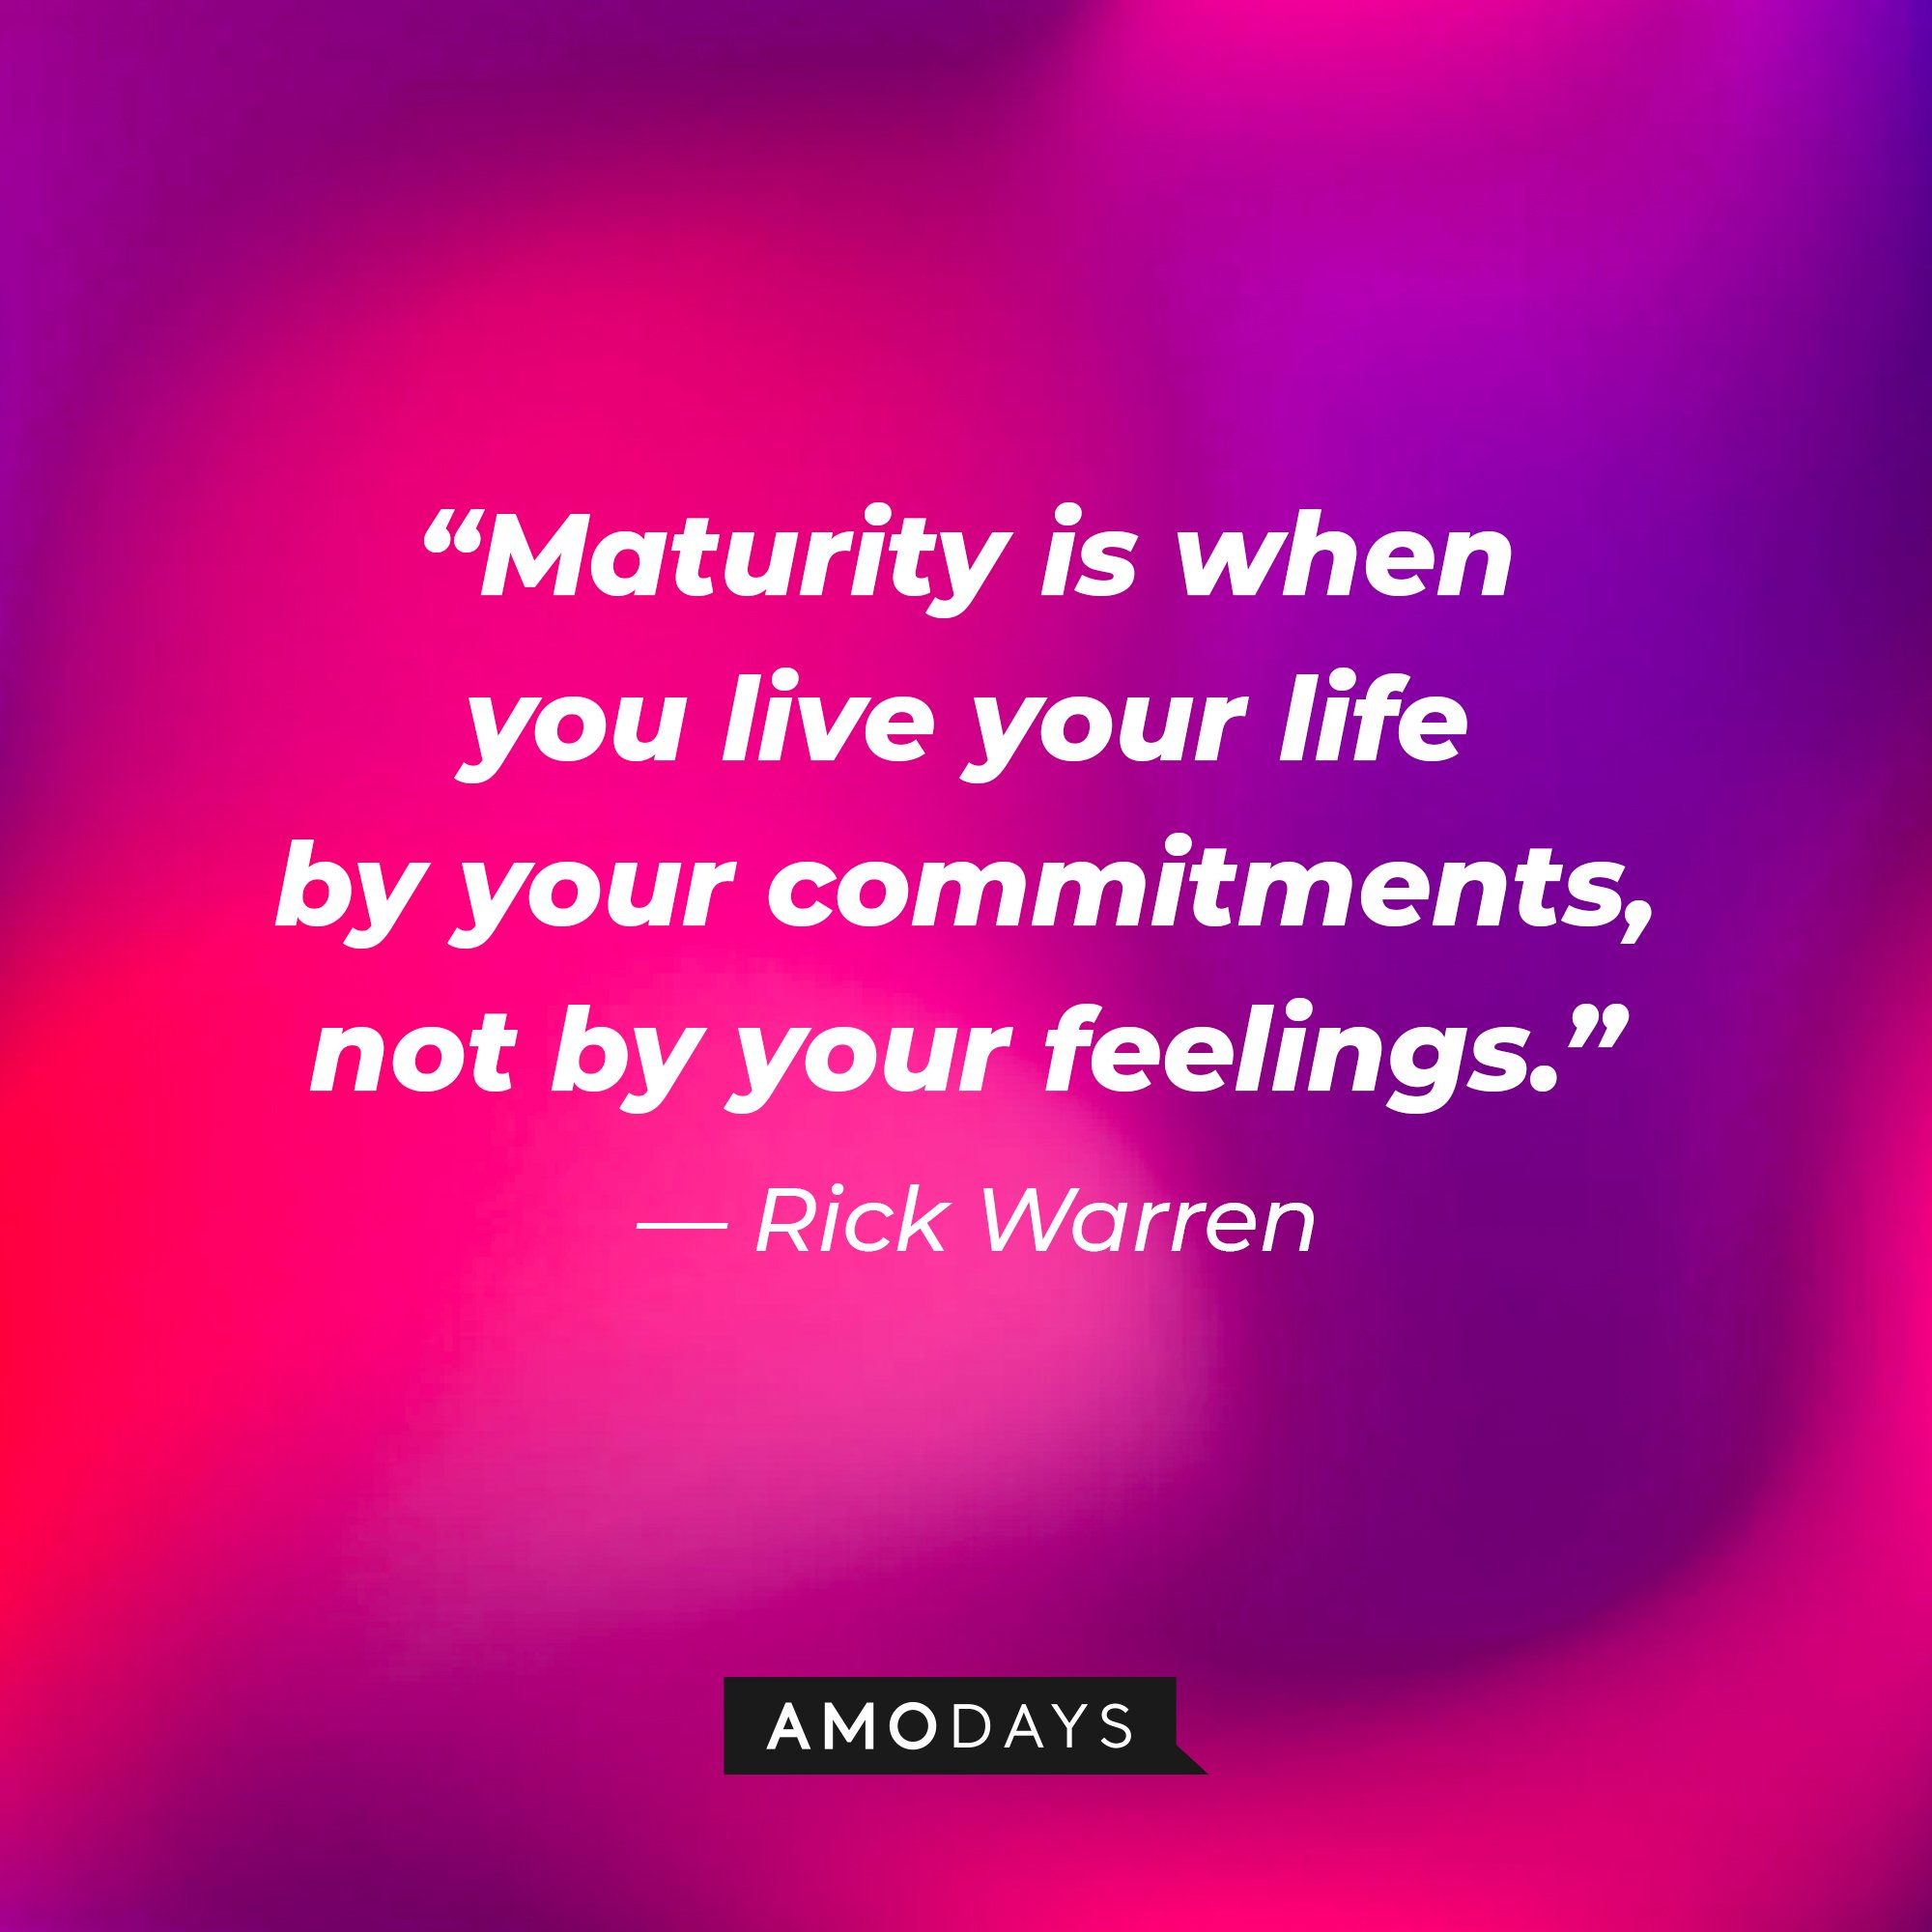 Rick Warren's quote: “Maturity is when you live your life by your commitments, not by your feelings.” | Image: AmoDays